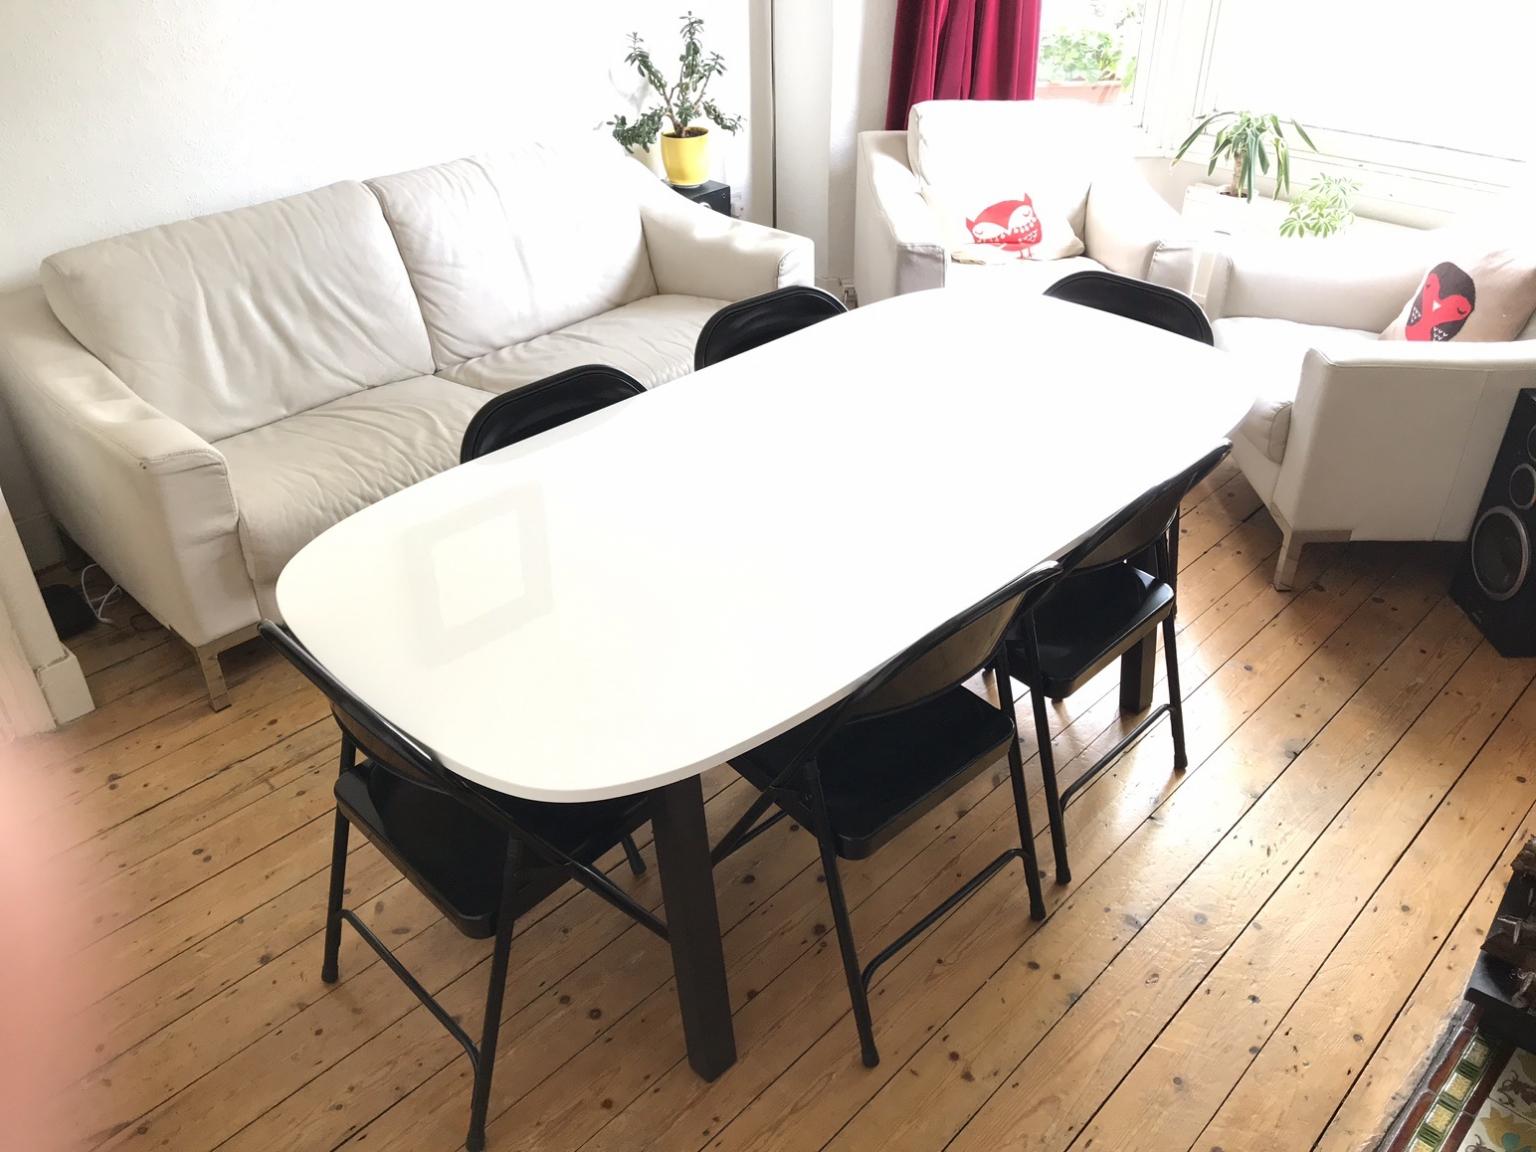 Ikea Oppeby 6 seater dining table 185x90cm in SE4 Lewisham 